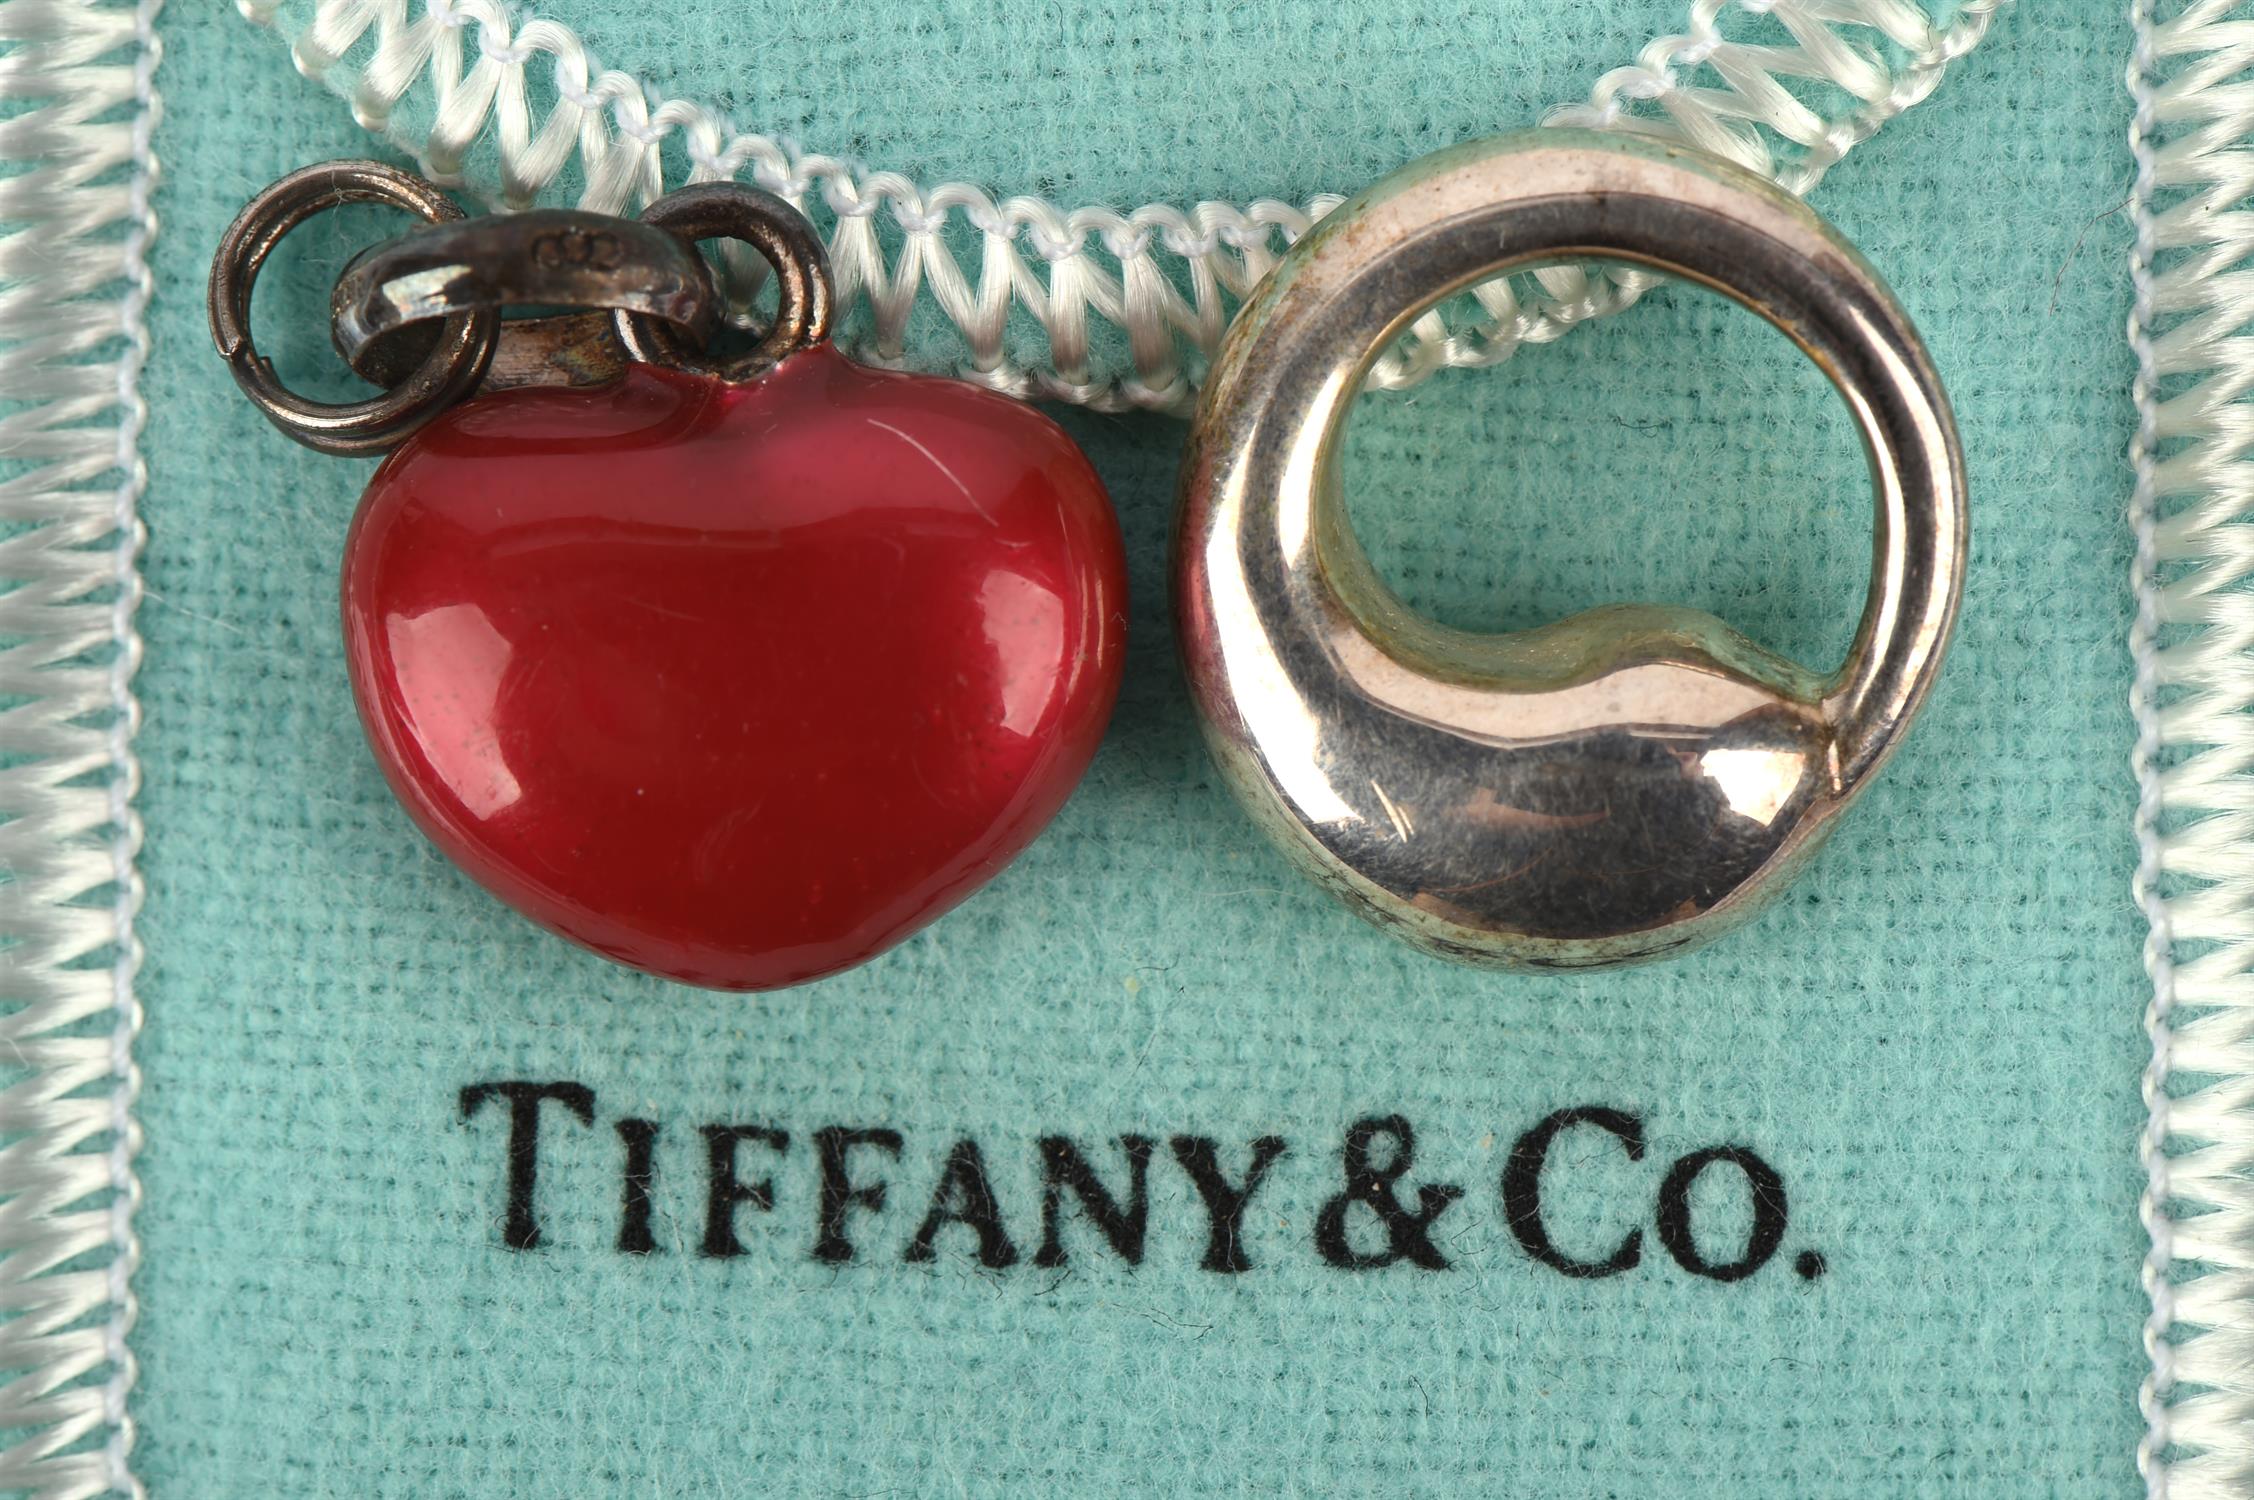 A silver Links of London red enamel heart charm, together with a Tiffany & Co, Elsa Peretti pendant